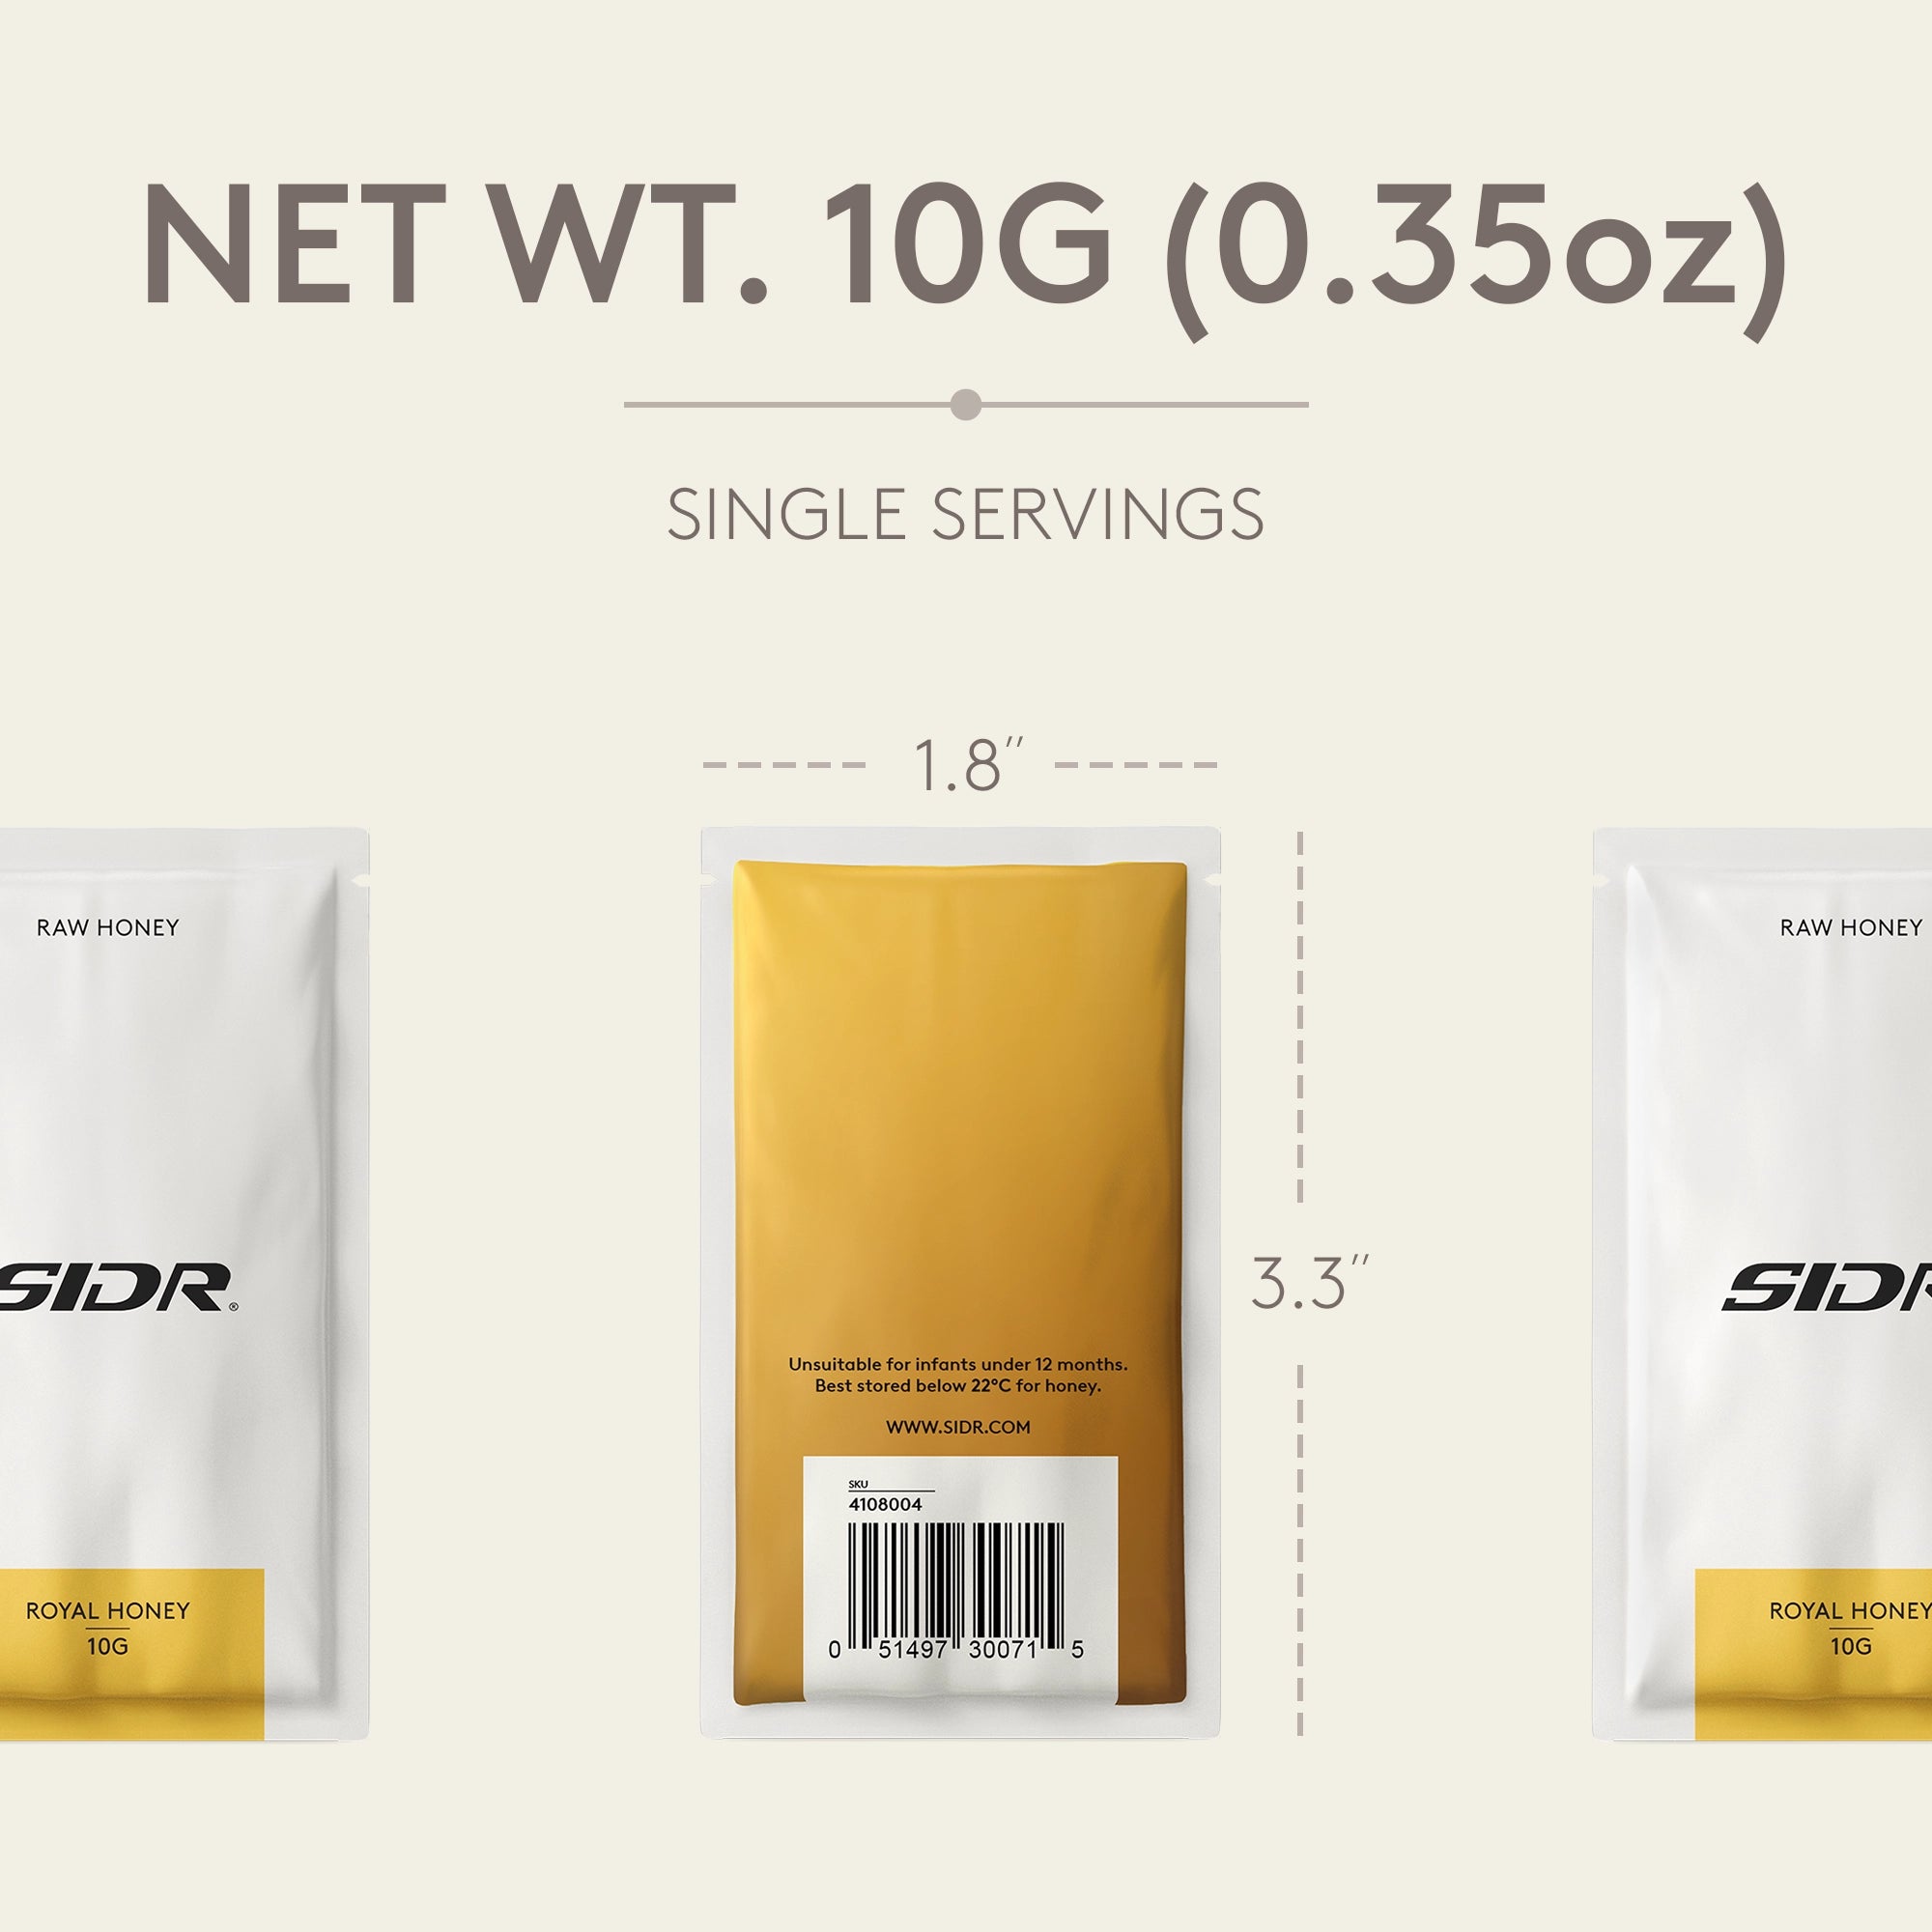 sidr royal honey packet net weight